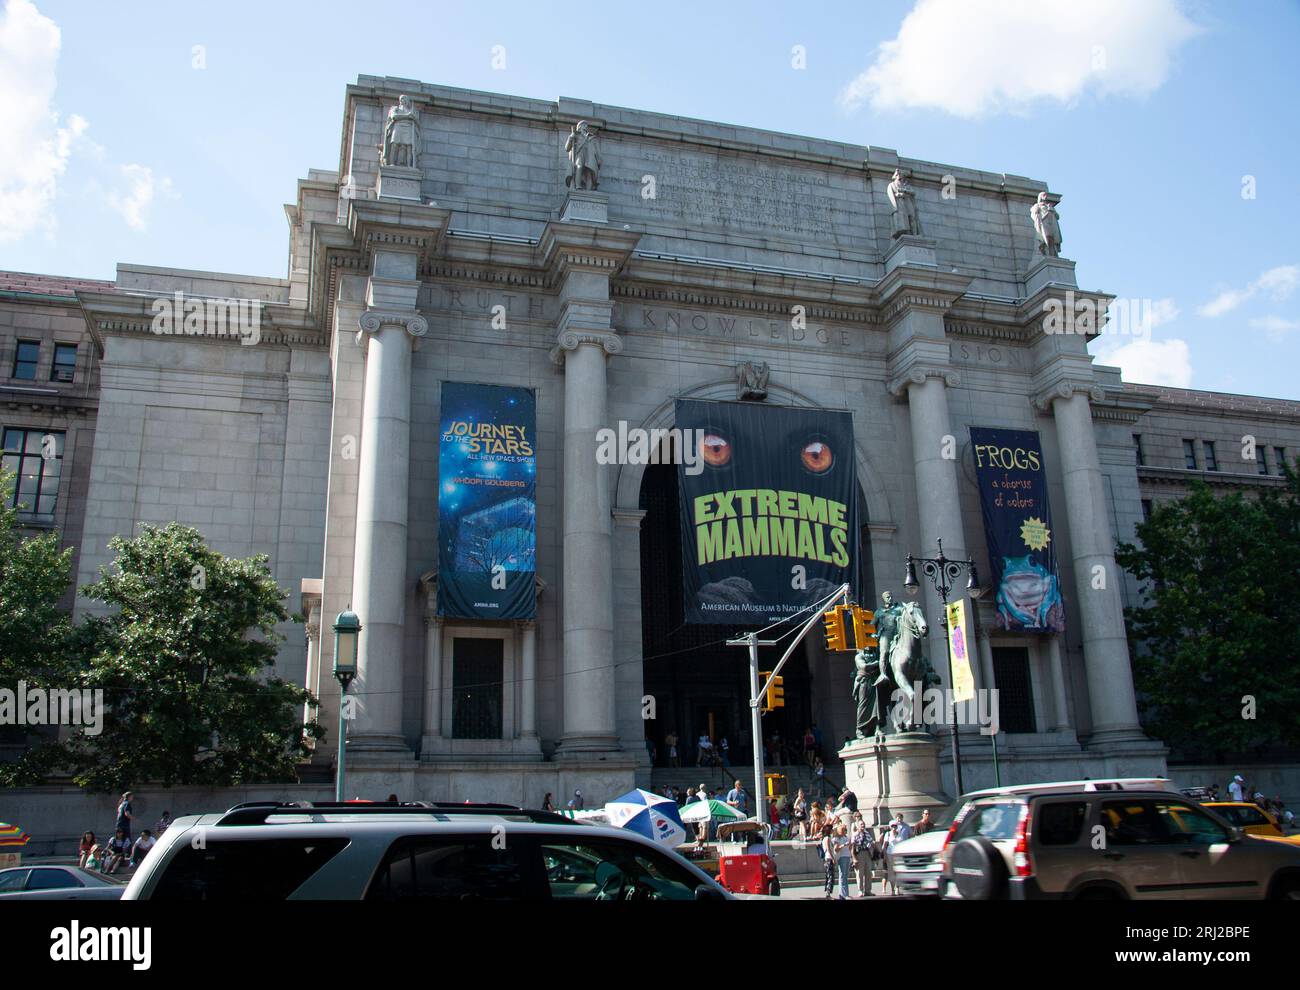 Das American Museum of Natural History Upper West Side New York City 2009 Stockfoto